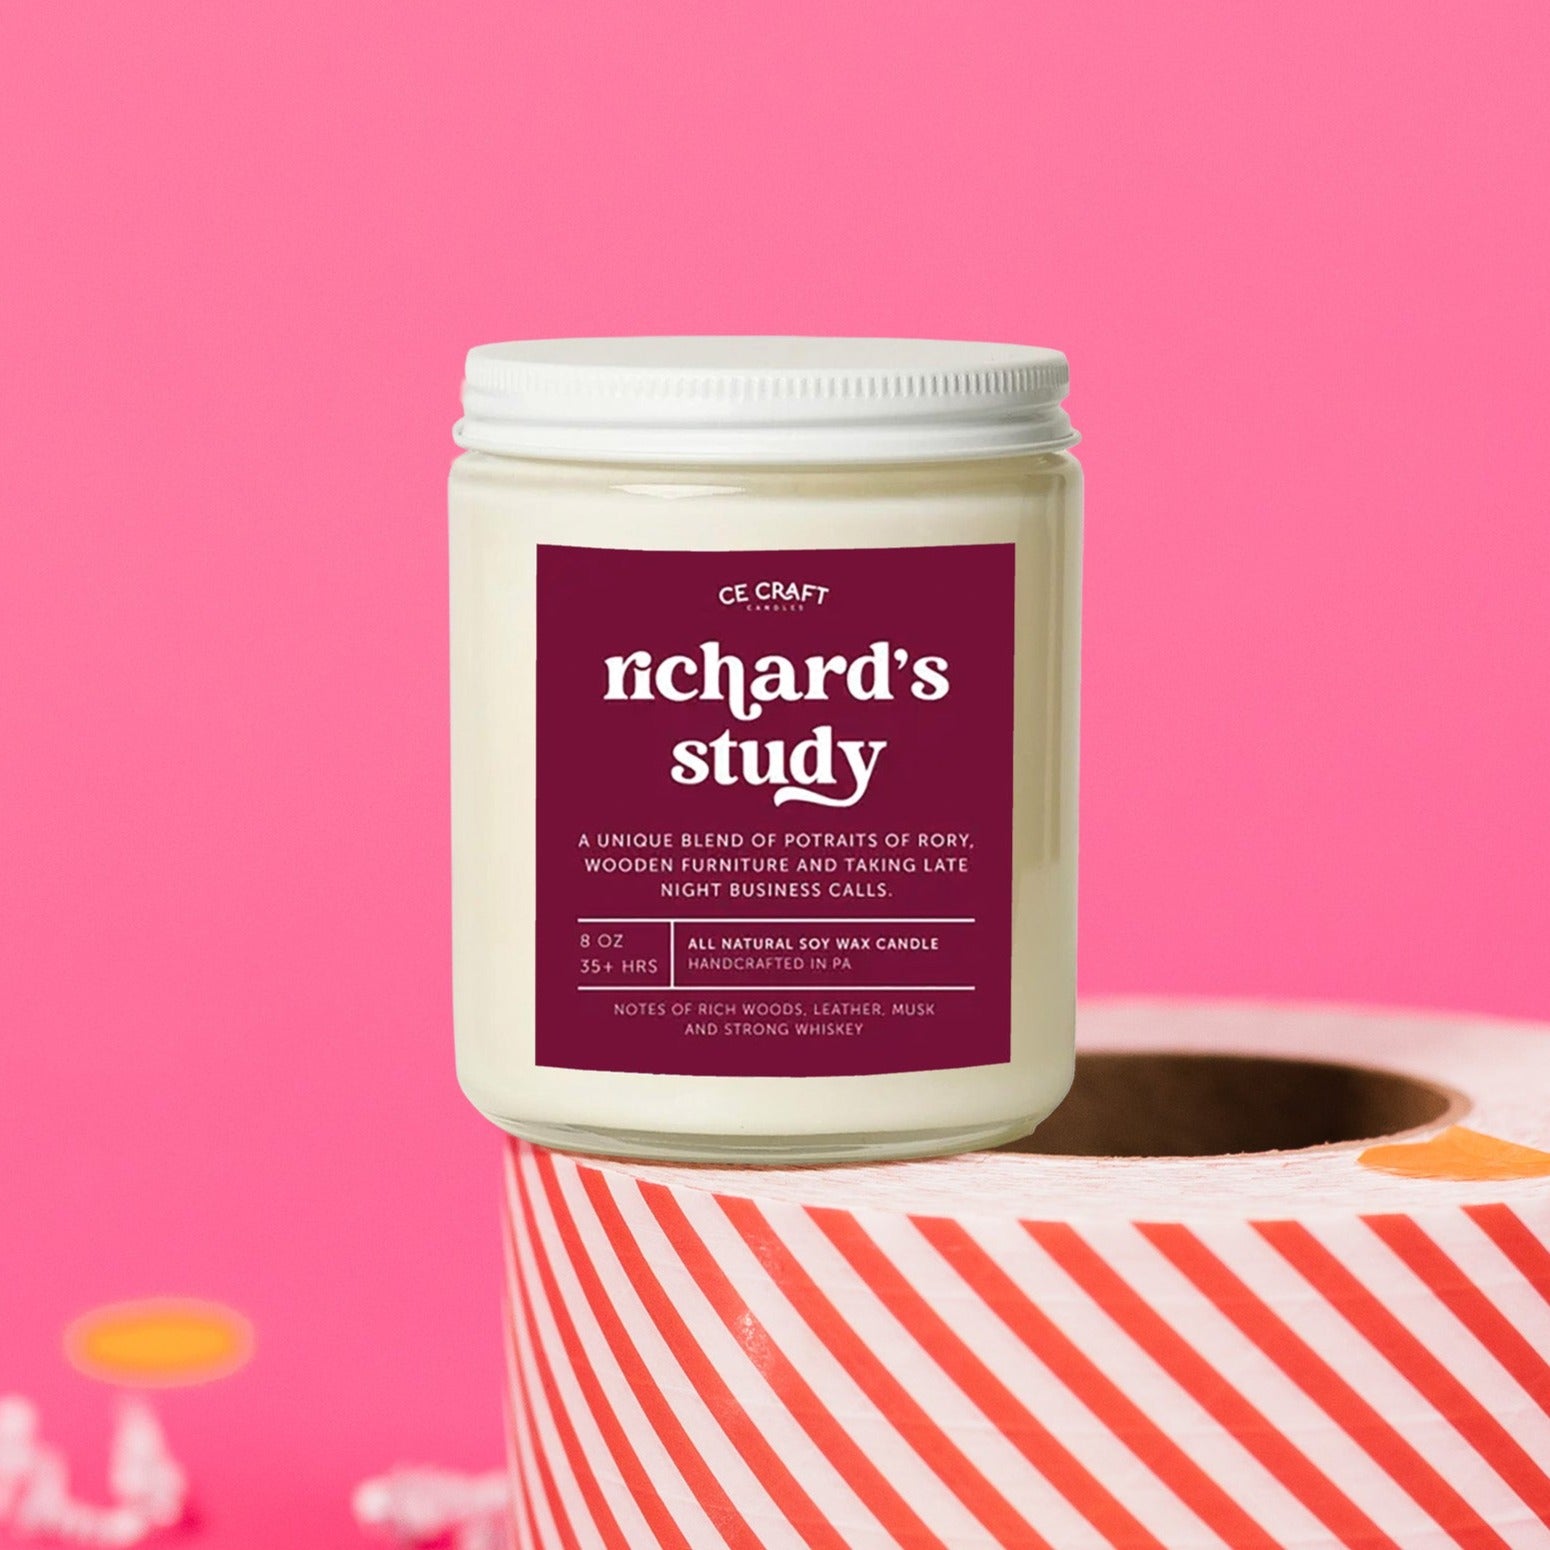 On a hot pink background sits a candle on a red and white packing tape with colorful confetti and white crinkle scattered around. It is has a maroon label with white text. This Richard's Study Candle has notes of rich woods, leather, musk & strong whiskey & is the perfect scent for your die hard Gilmore Girls Fan! Candle is 8 oz and burns 35 hours.